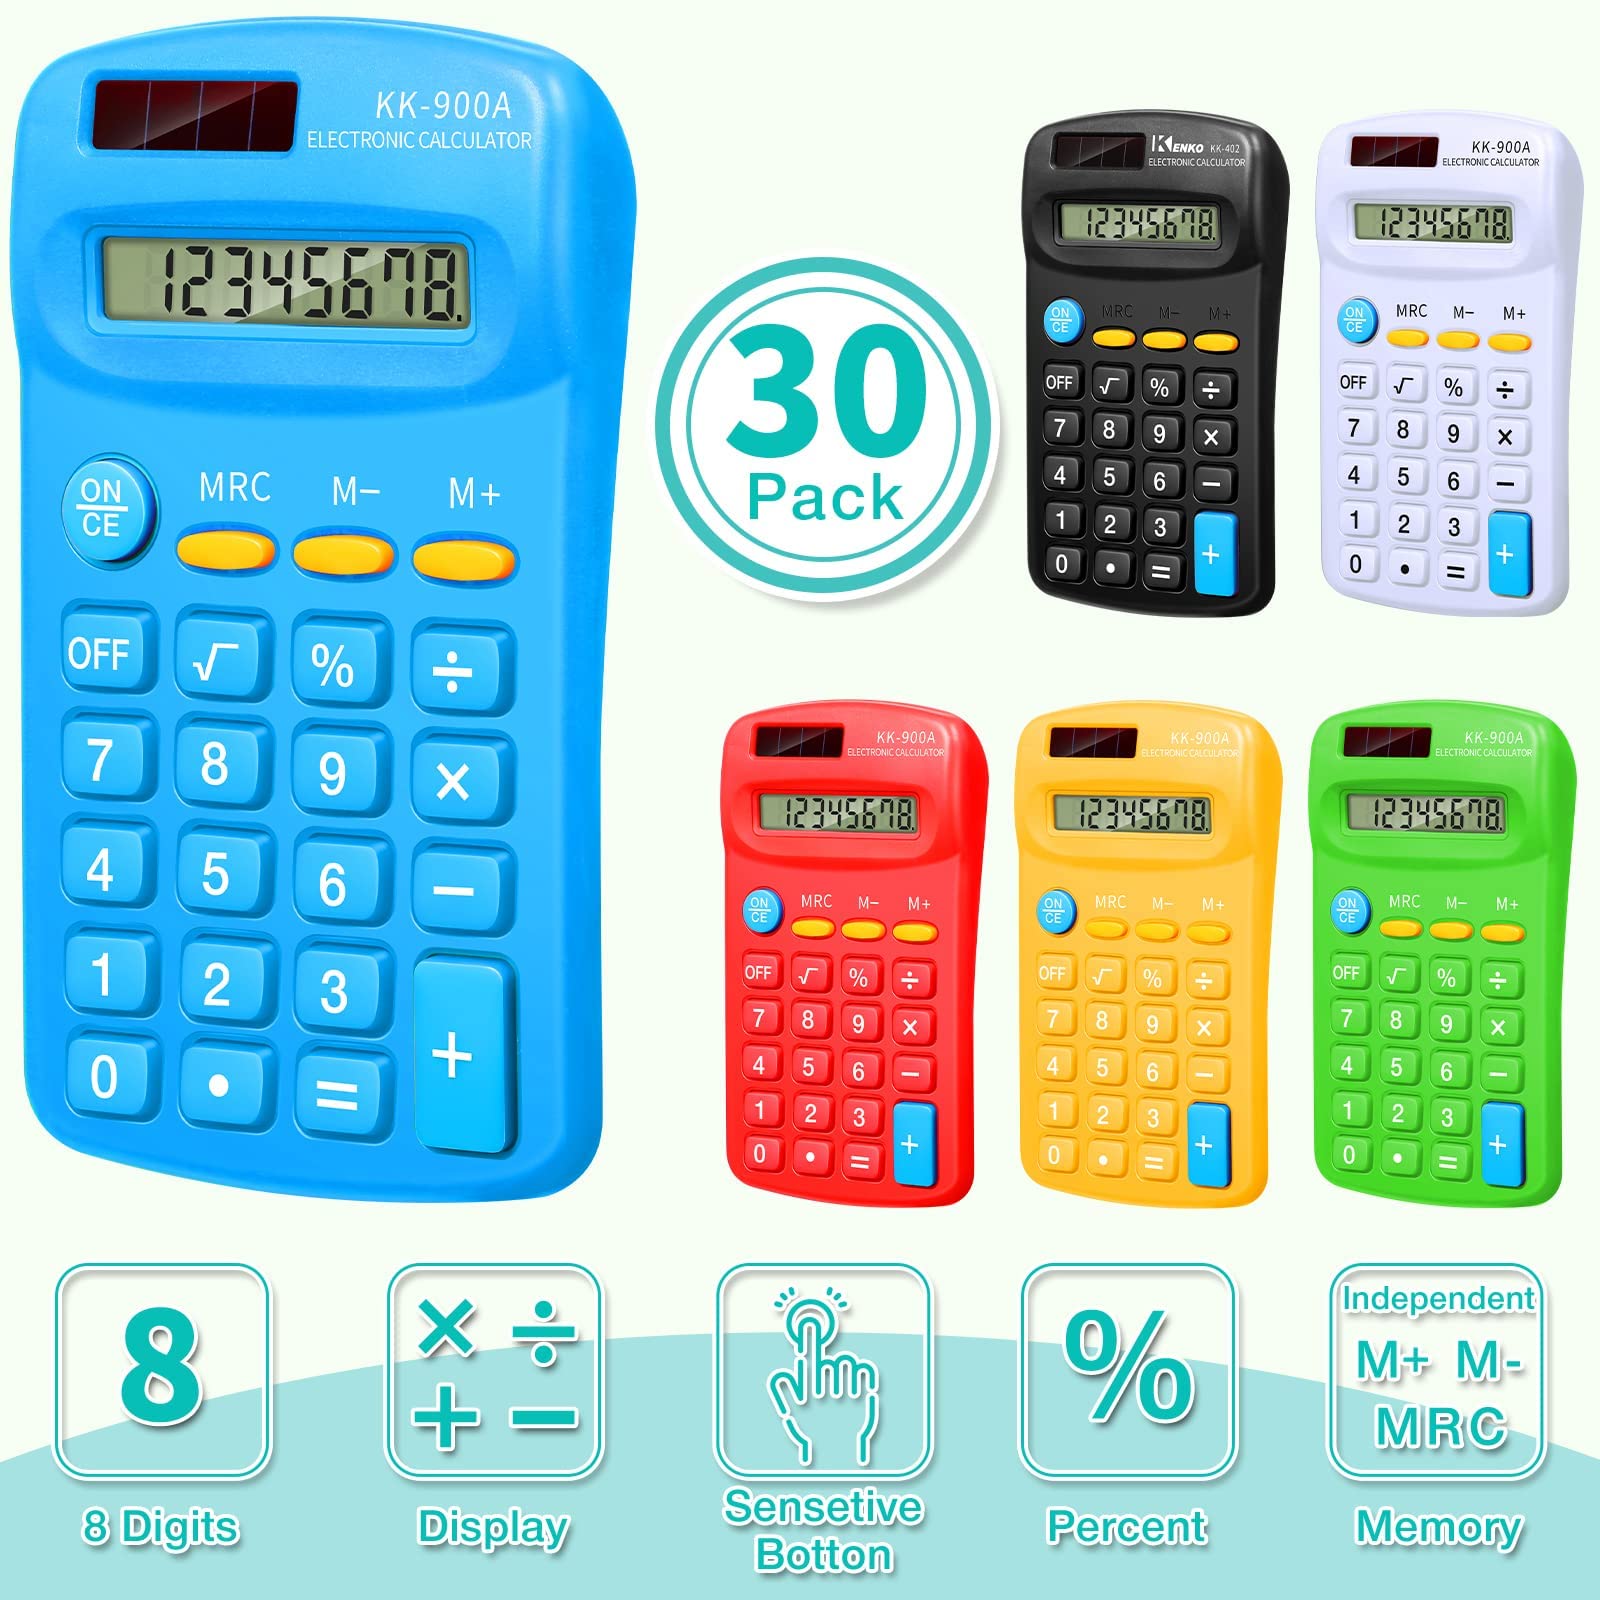 30 Pack Pocket Calculator Small Battery Powered Calculator Bulk Mini Size 4 Function Calculator Hand Held Basic Calculator for Students Kids School Home Office (Green, White, Red, Yellow, Blue, Black)